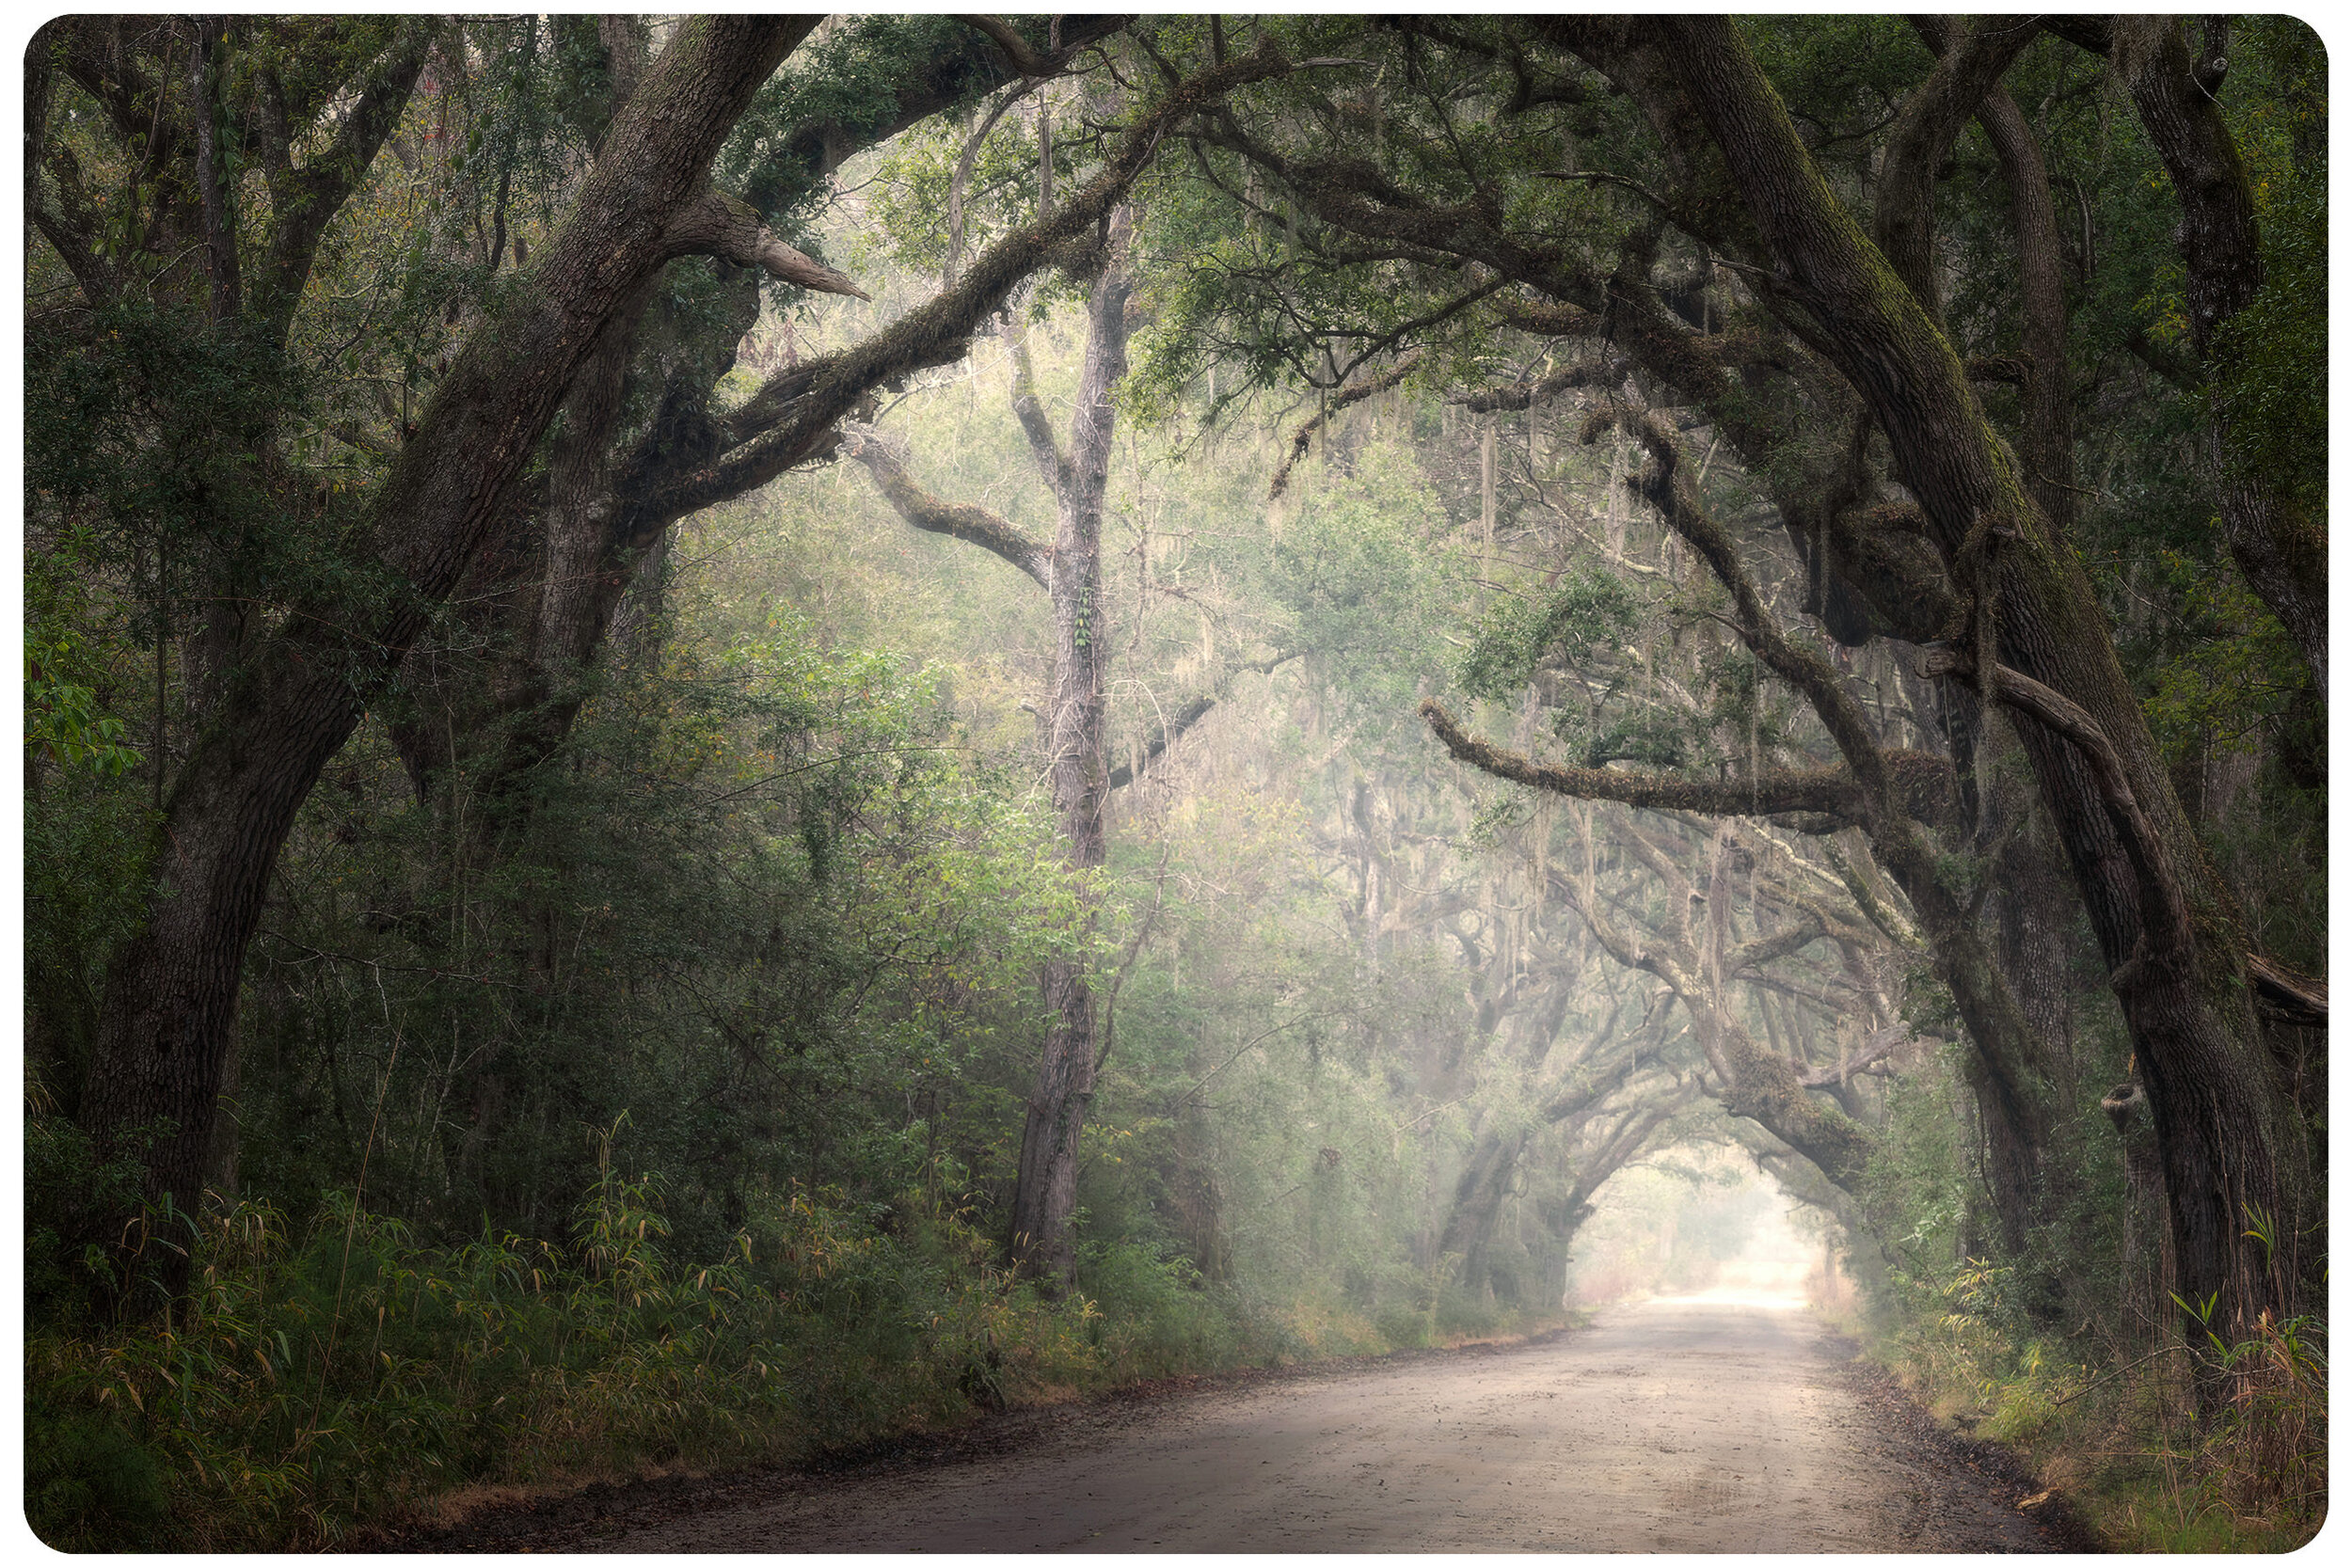 Charleston Photography Tours - Backroads and Live Oaks Excursion